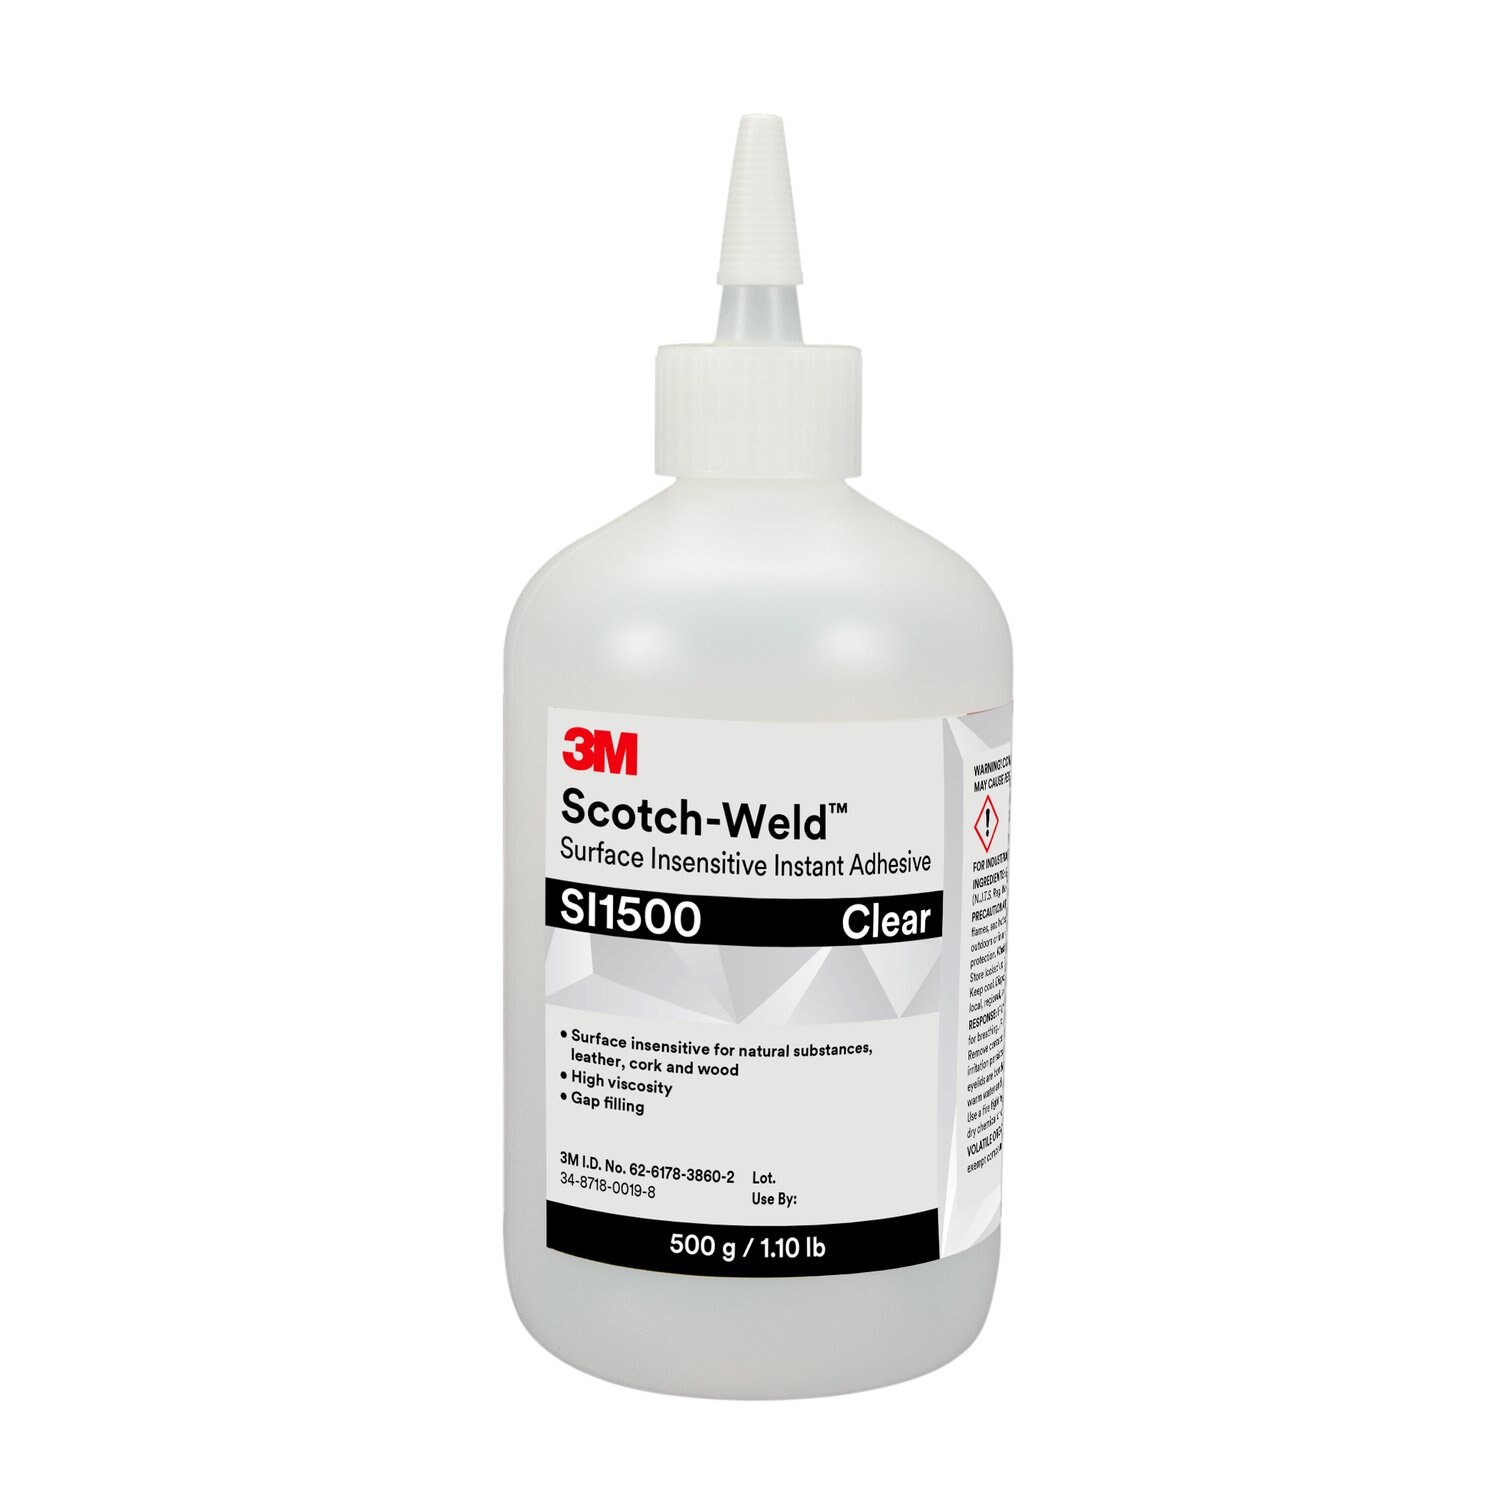 7100039243 - 3M Scotch-Weld Surface Insensitive Instant Adhesive SI1500, Clear, 500
Gram, 1/Case